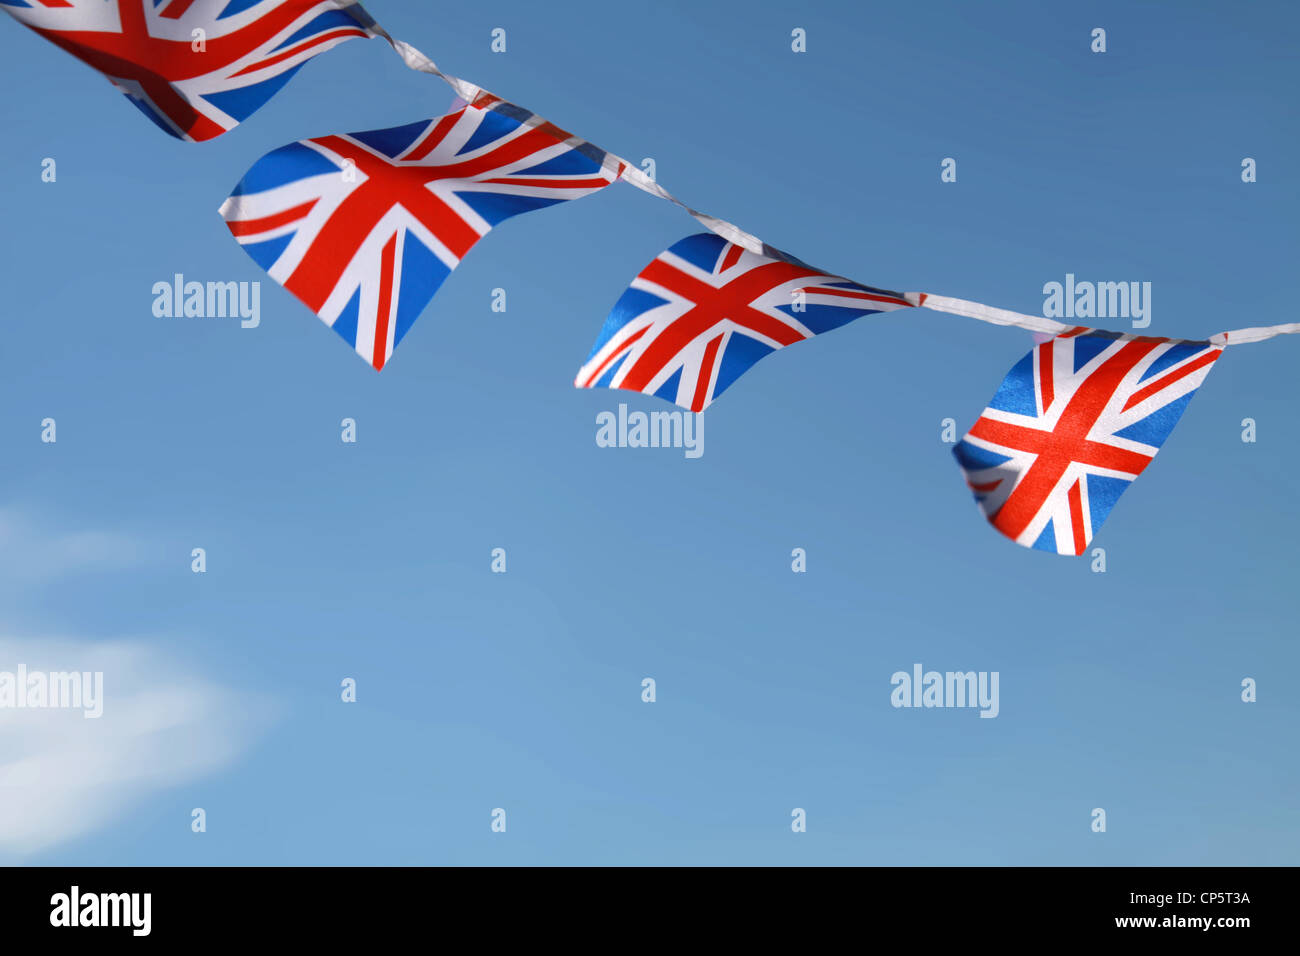 Jubilee United kingdom flags blowing in wind with blue sky background Stock Photo